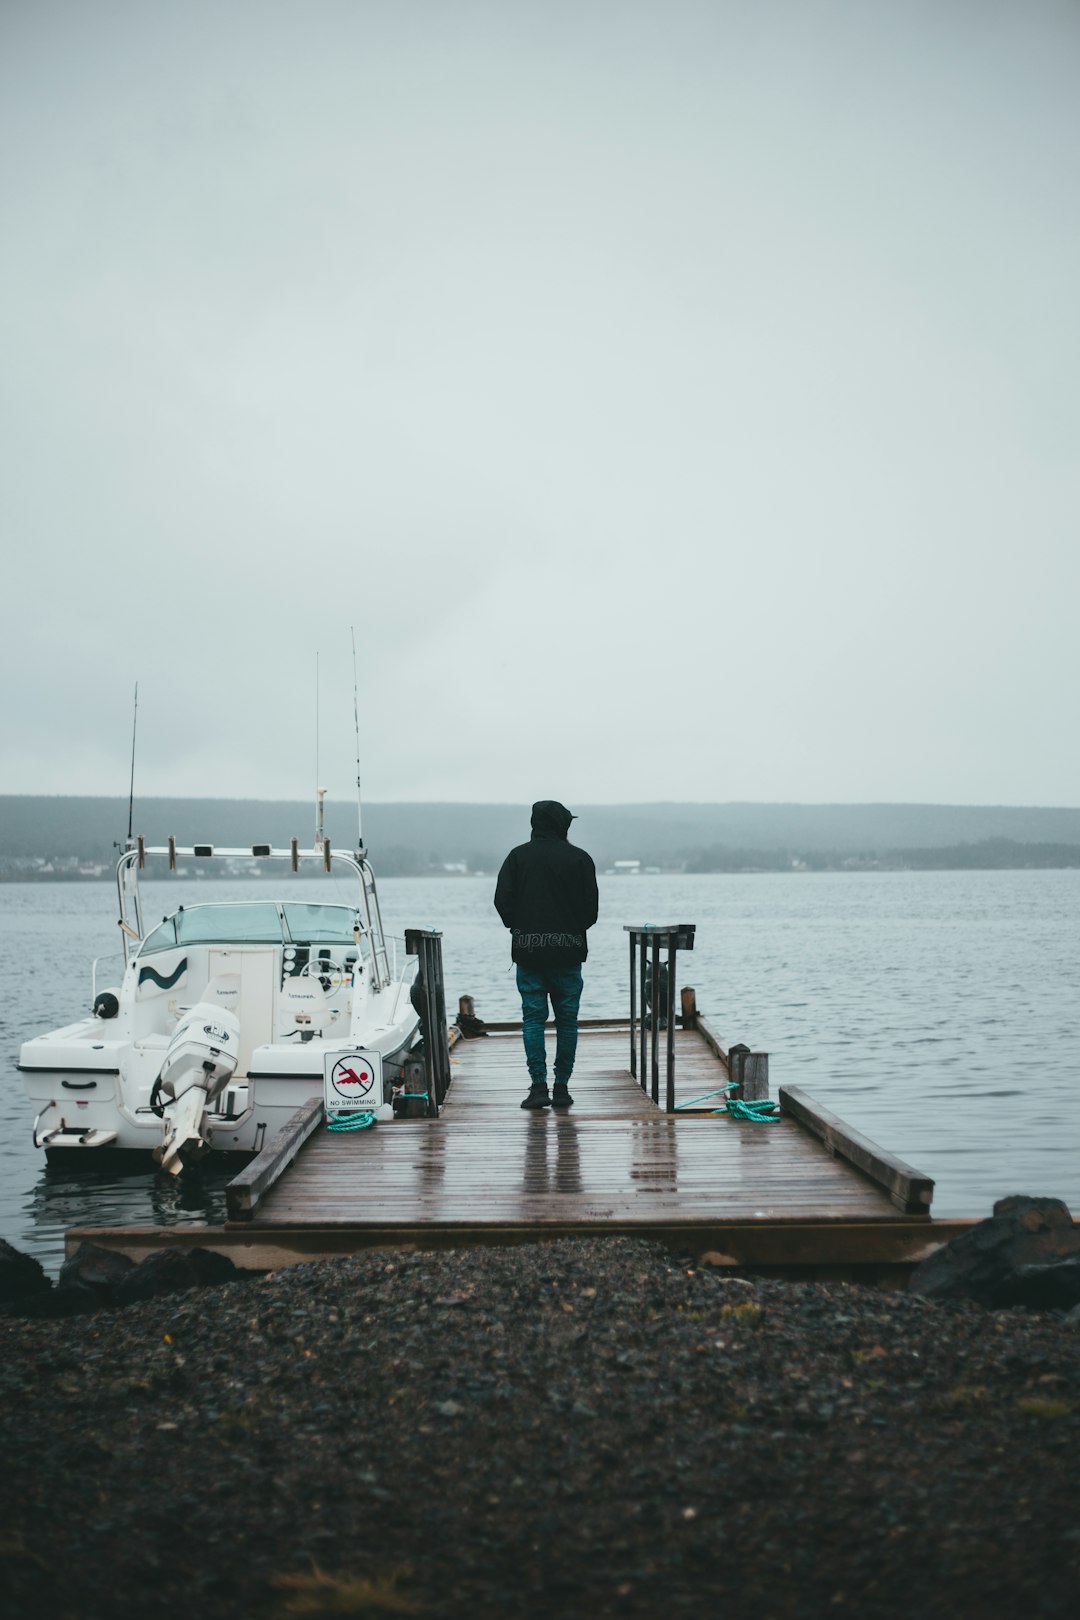 man in black jacket and pants standing on dock near white motor boat during daytime